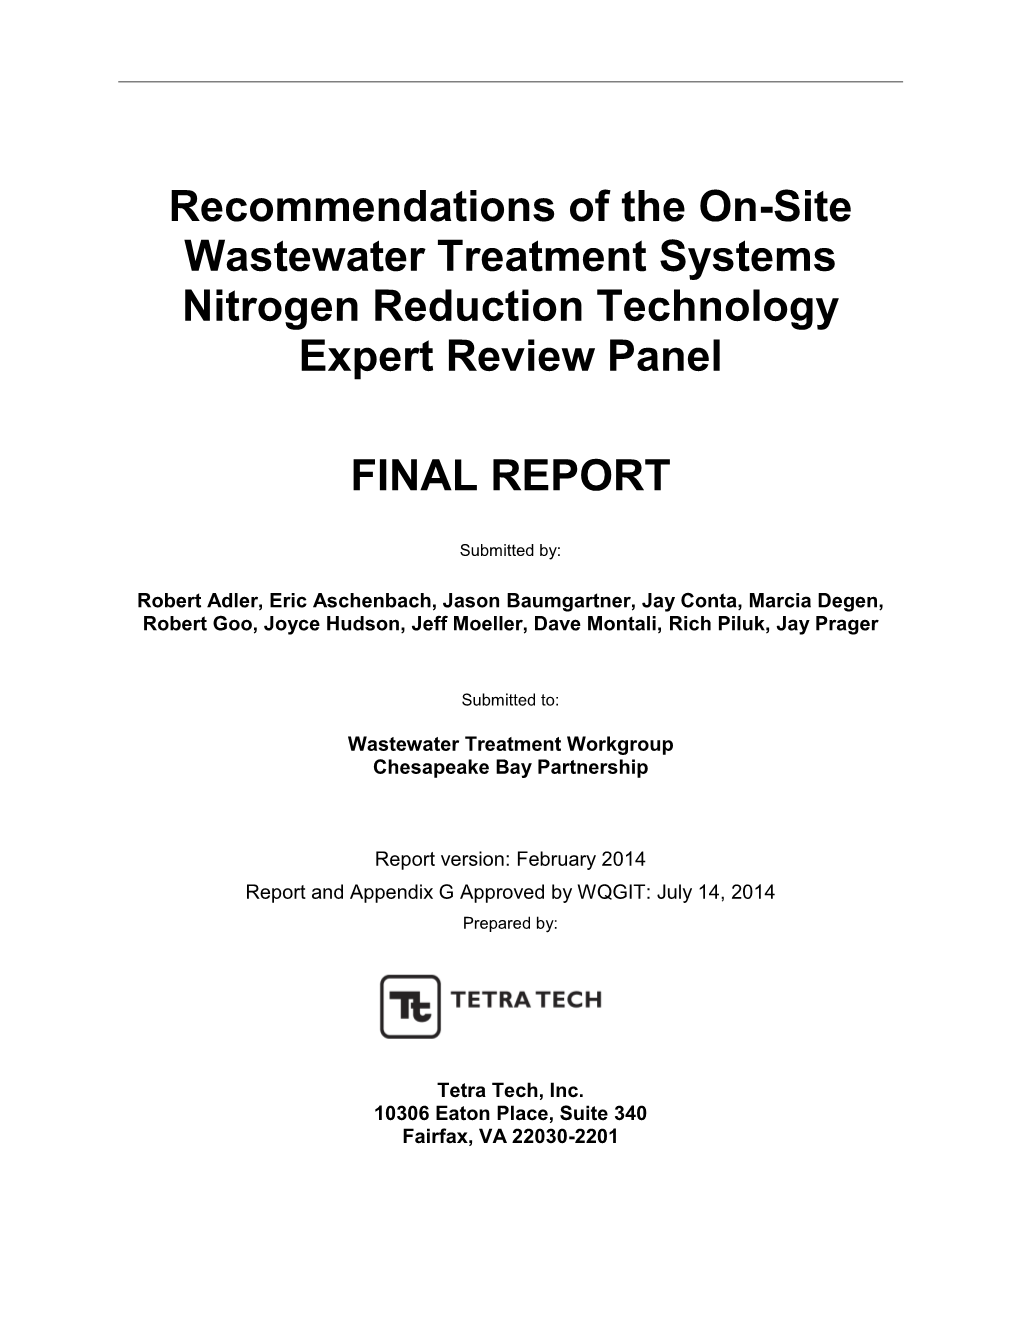 Recommendations of the On-Site Wastewater Treatment Systems Nitrogen Reduction Technology Expert Review Panel